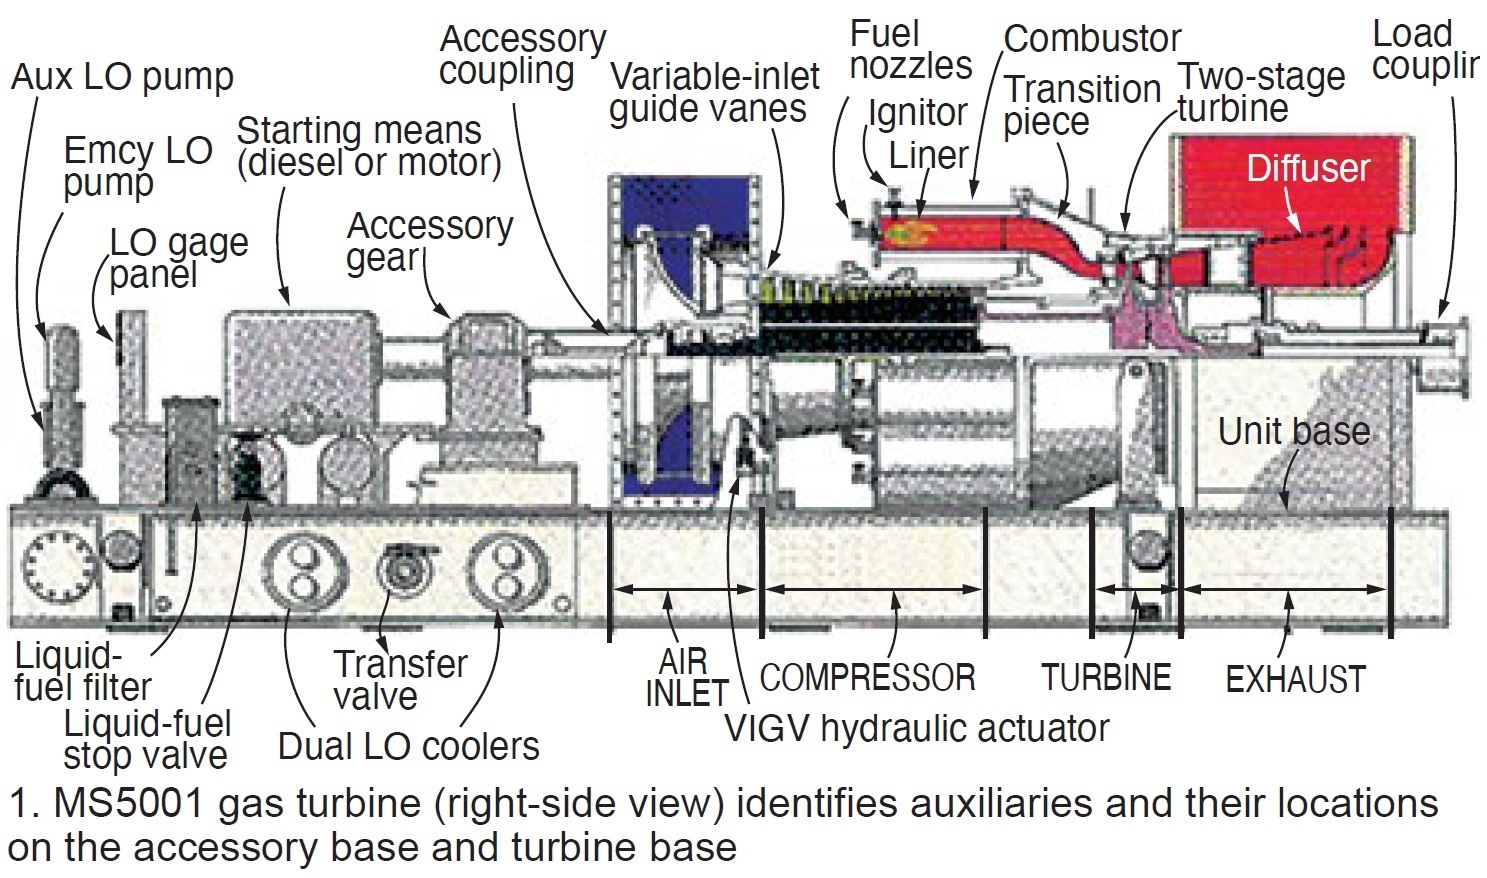 TURBINE TIPS for models of legacy GE turbines Combined Cycle Journal